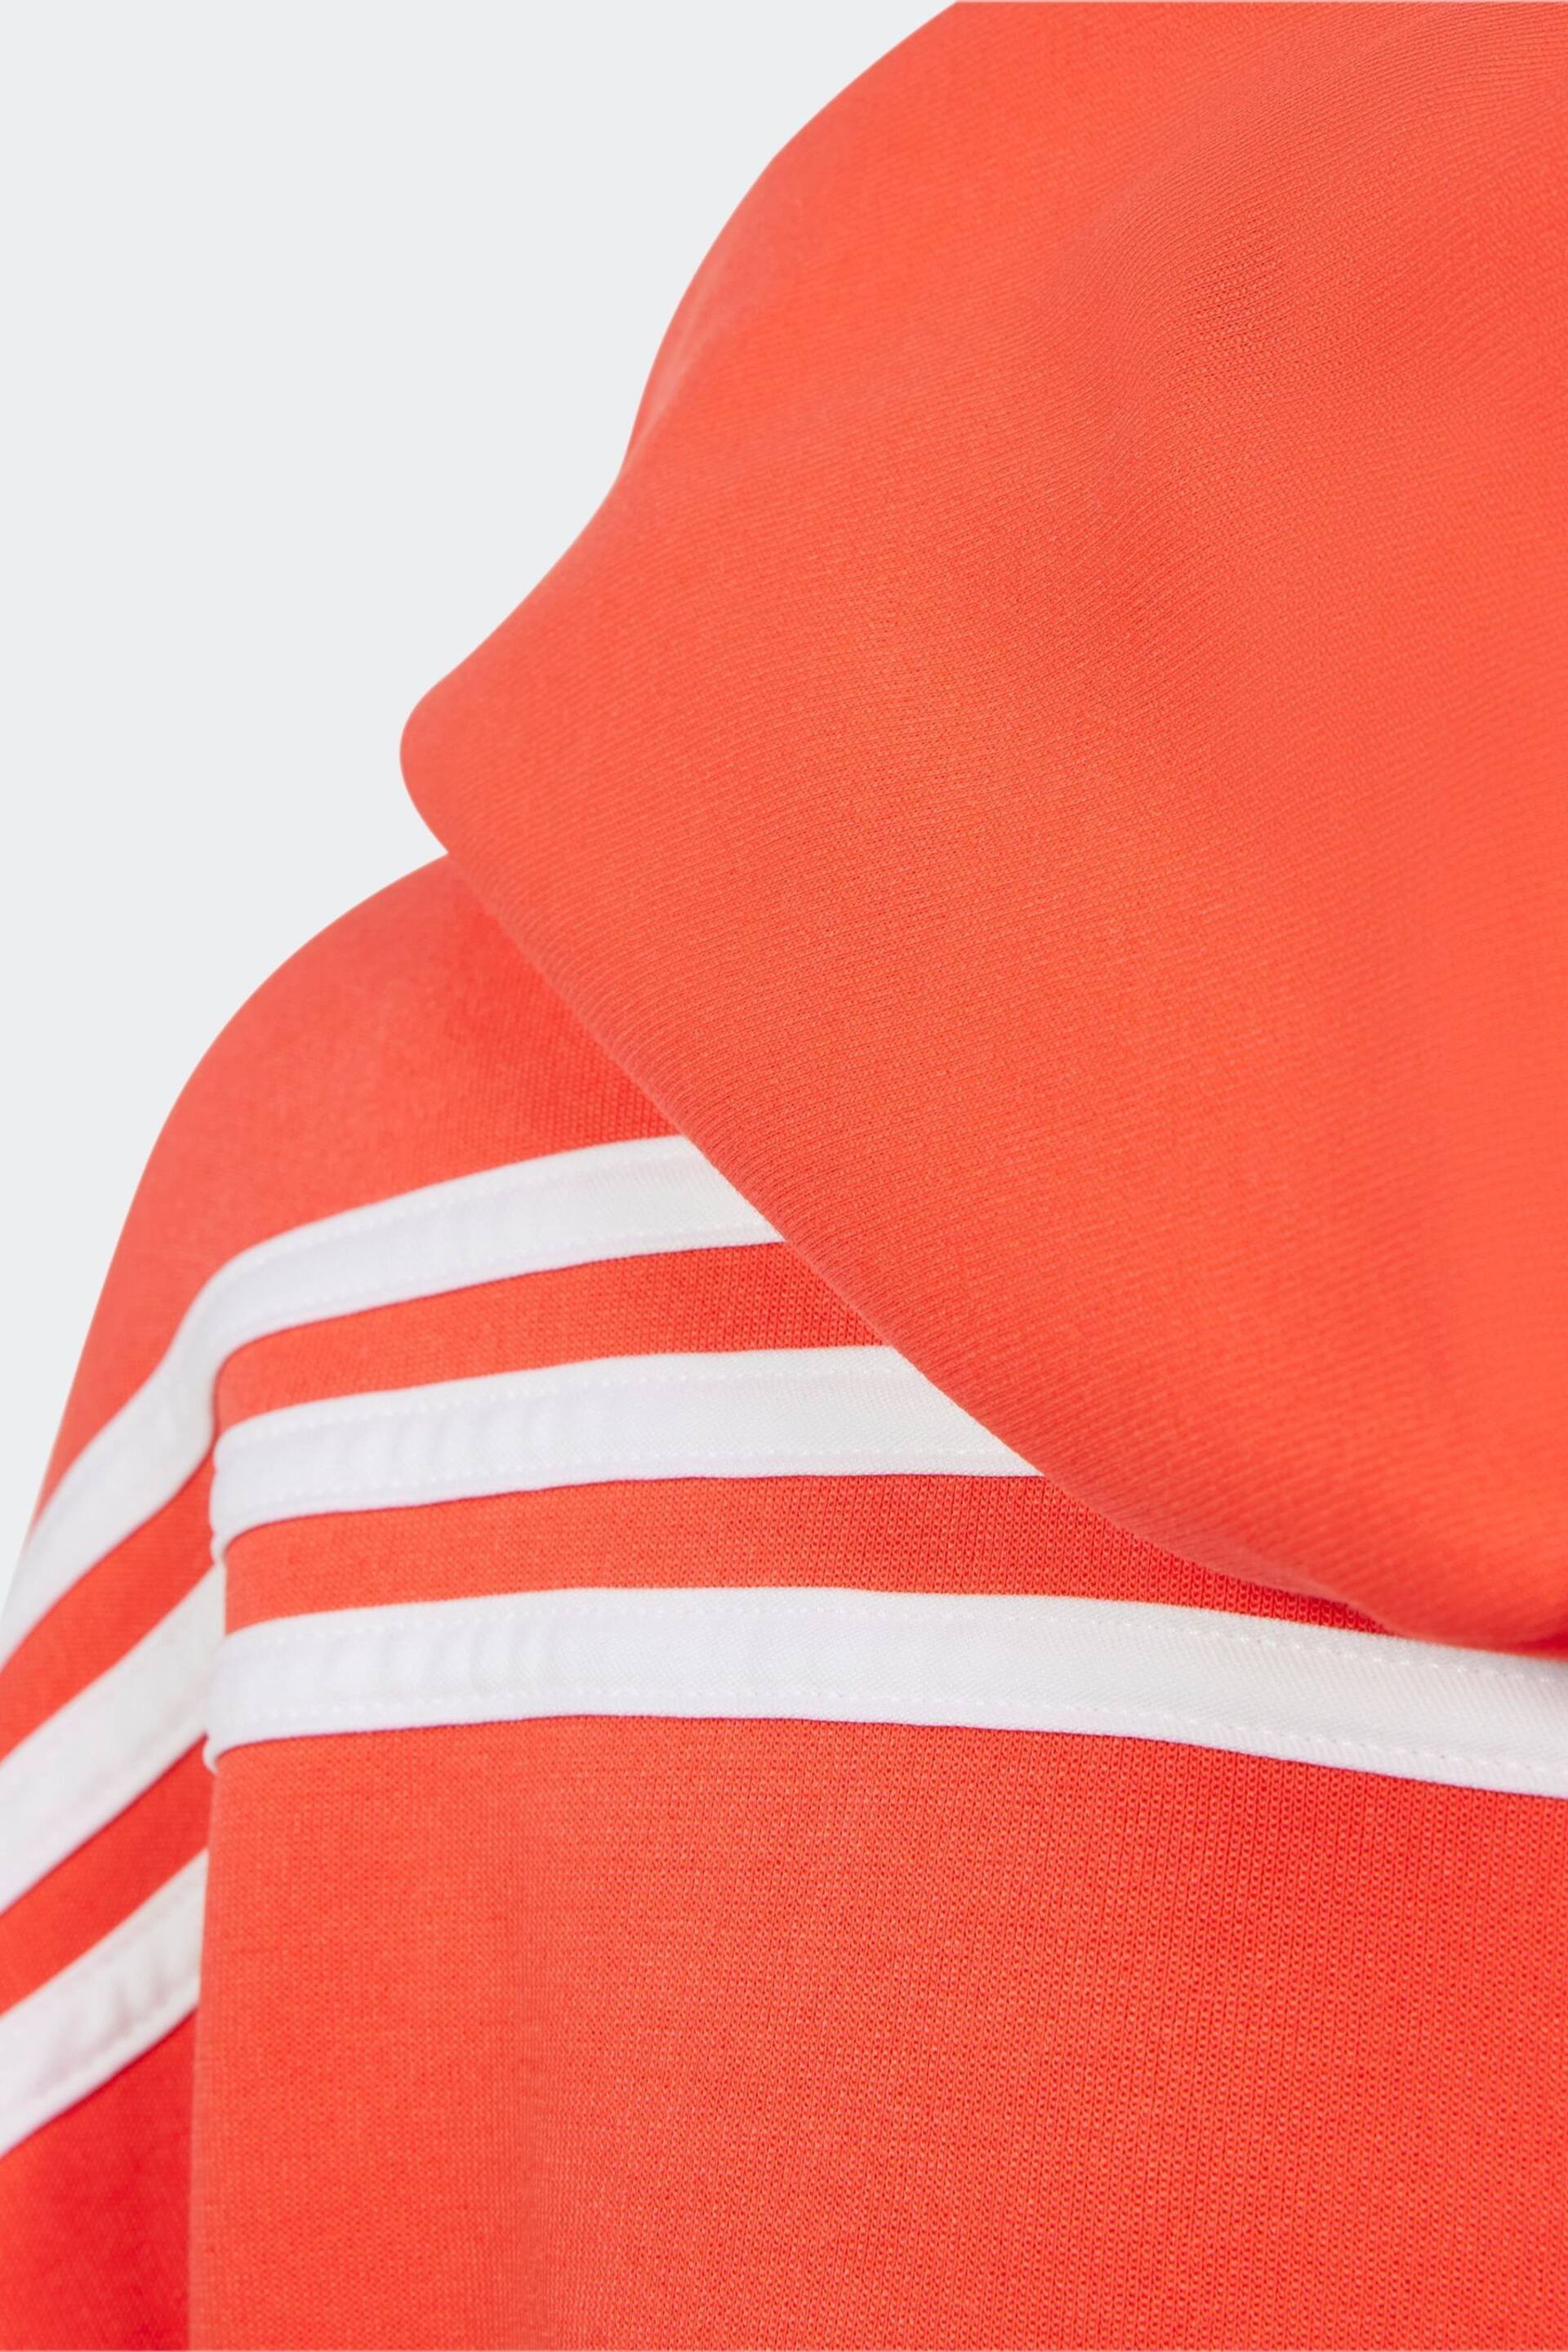 adidas Red Sportswear Future Icons 3-Stripes Full-Zip Hooded Track Top - Image 4 of 5